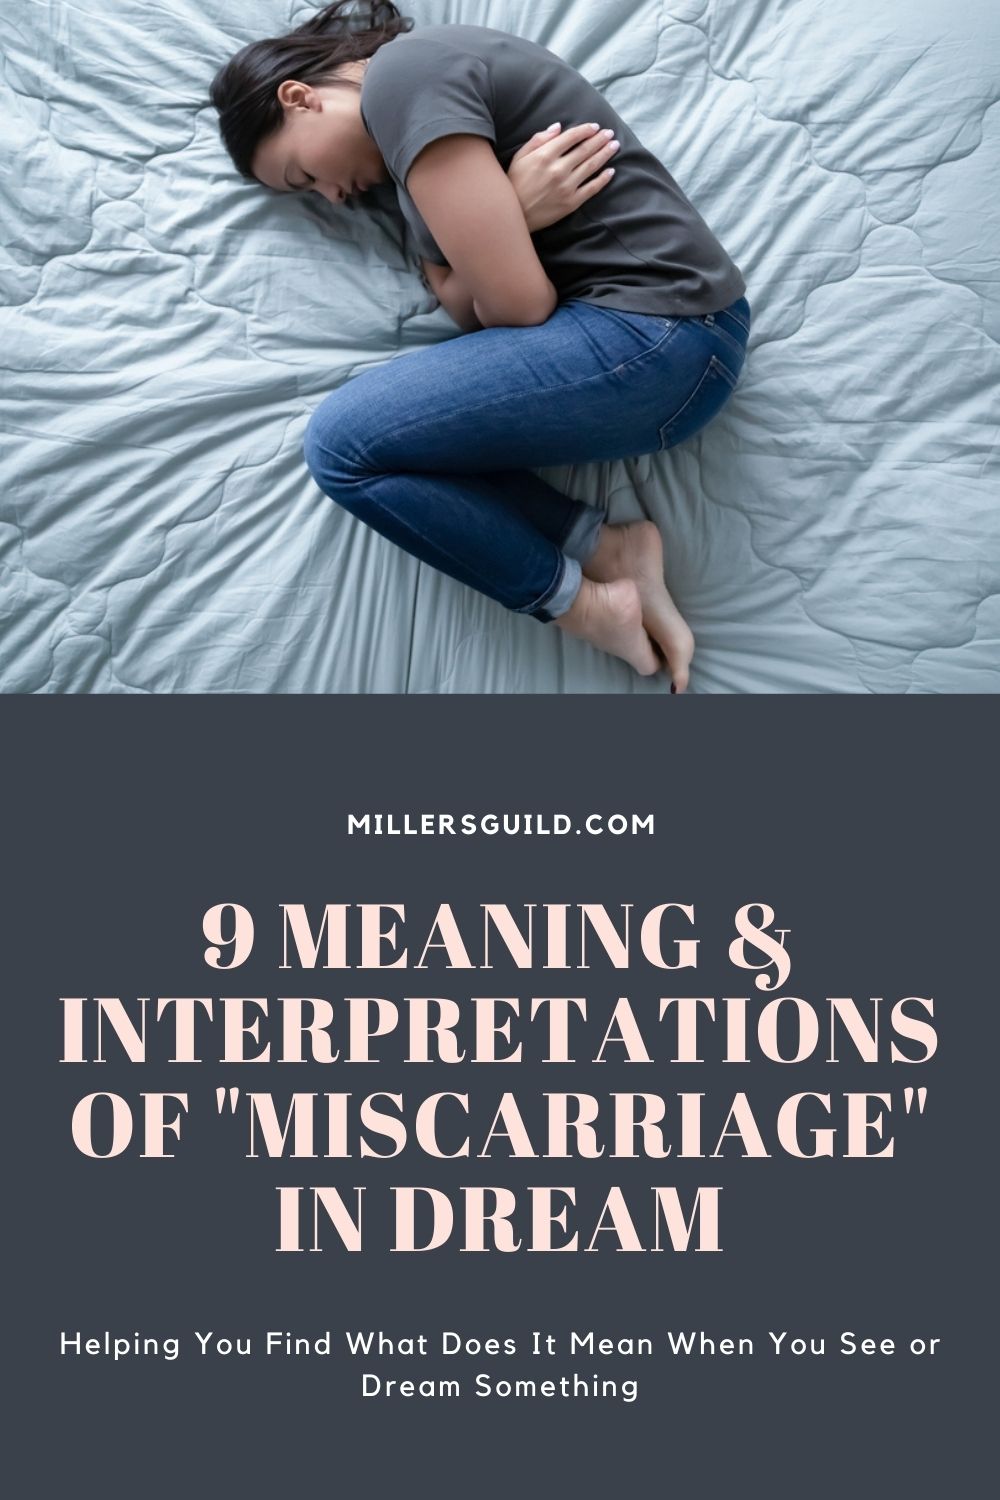 What Does A Miscarriage Dream Symbolize?